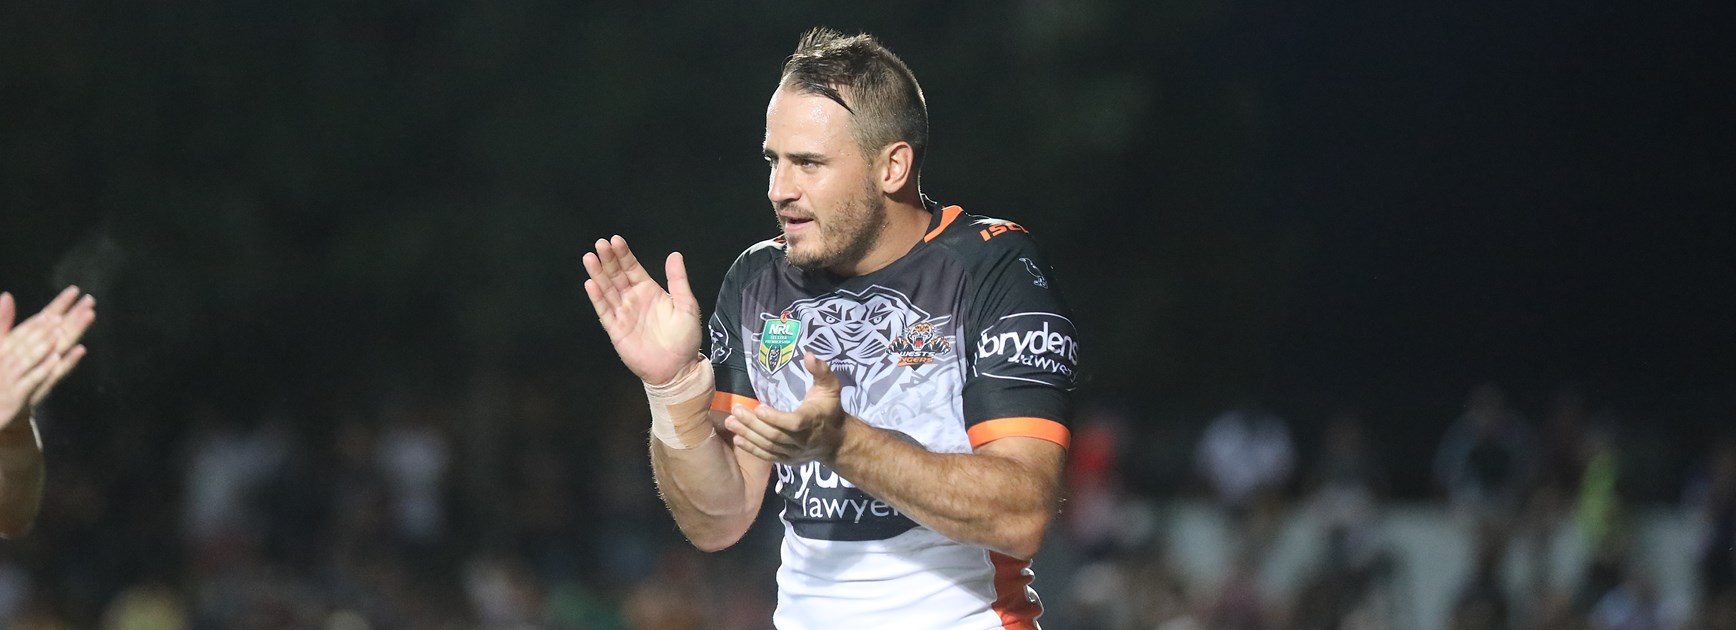 Wests Tigers defeat Cowboys in Cairns trial match